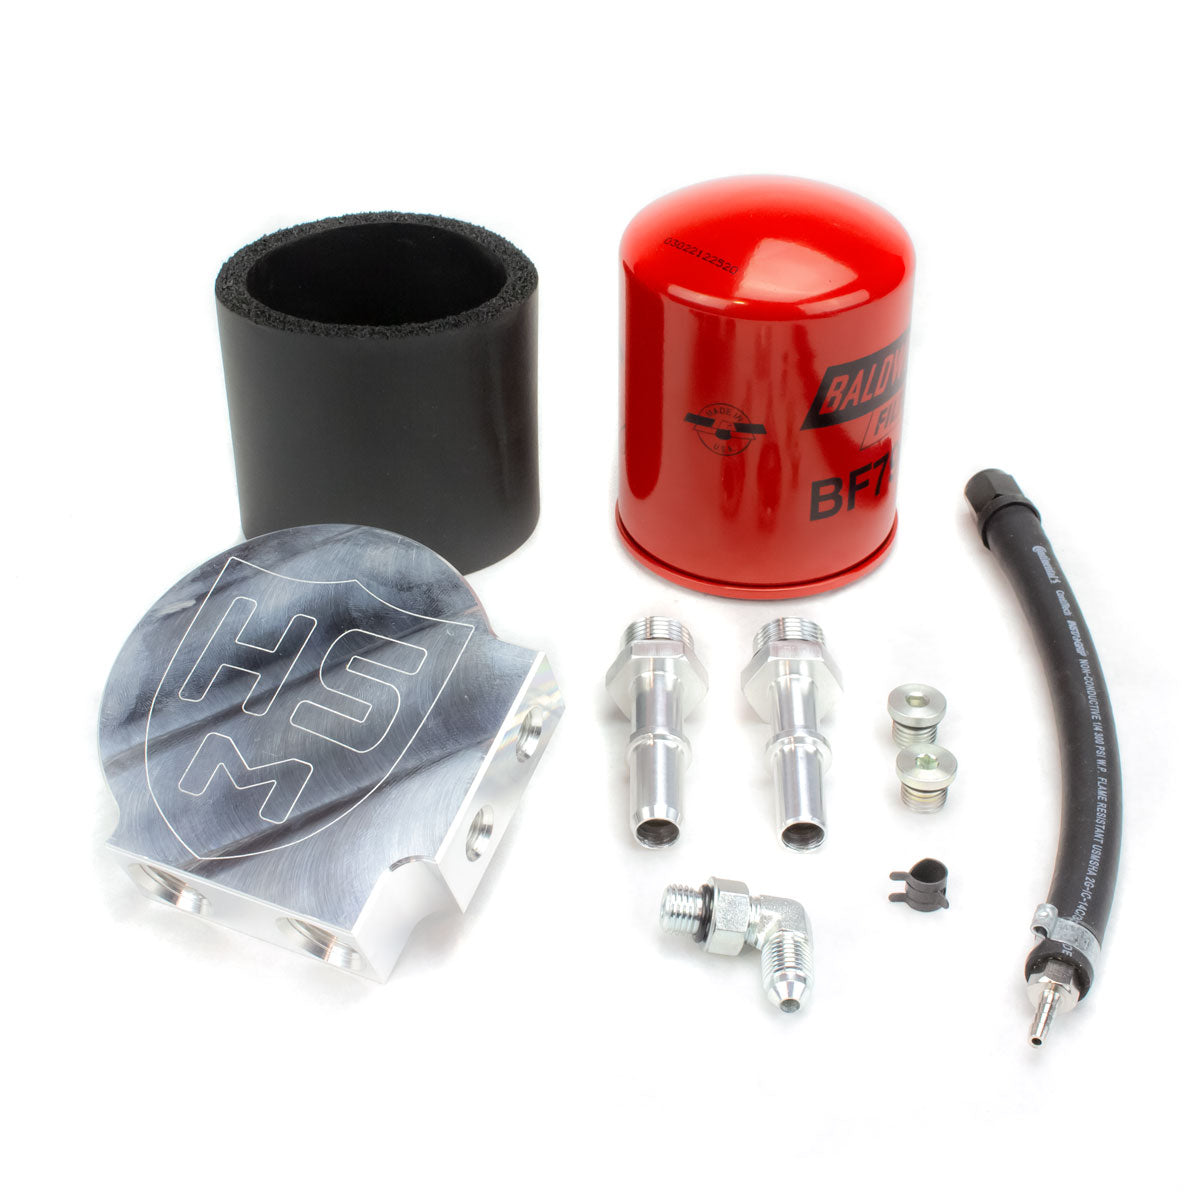 Fuel Filter Change: How to Easily Prime Your 6.7 Powerstroke Engine.